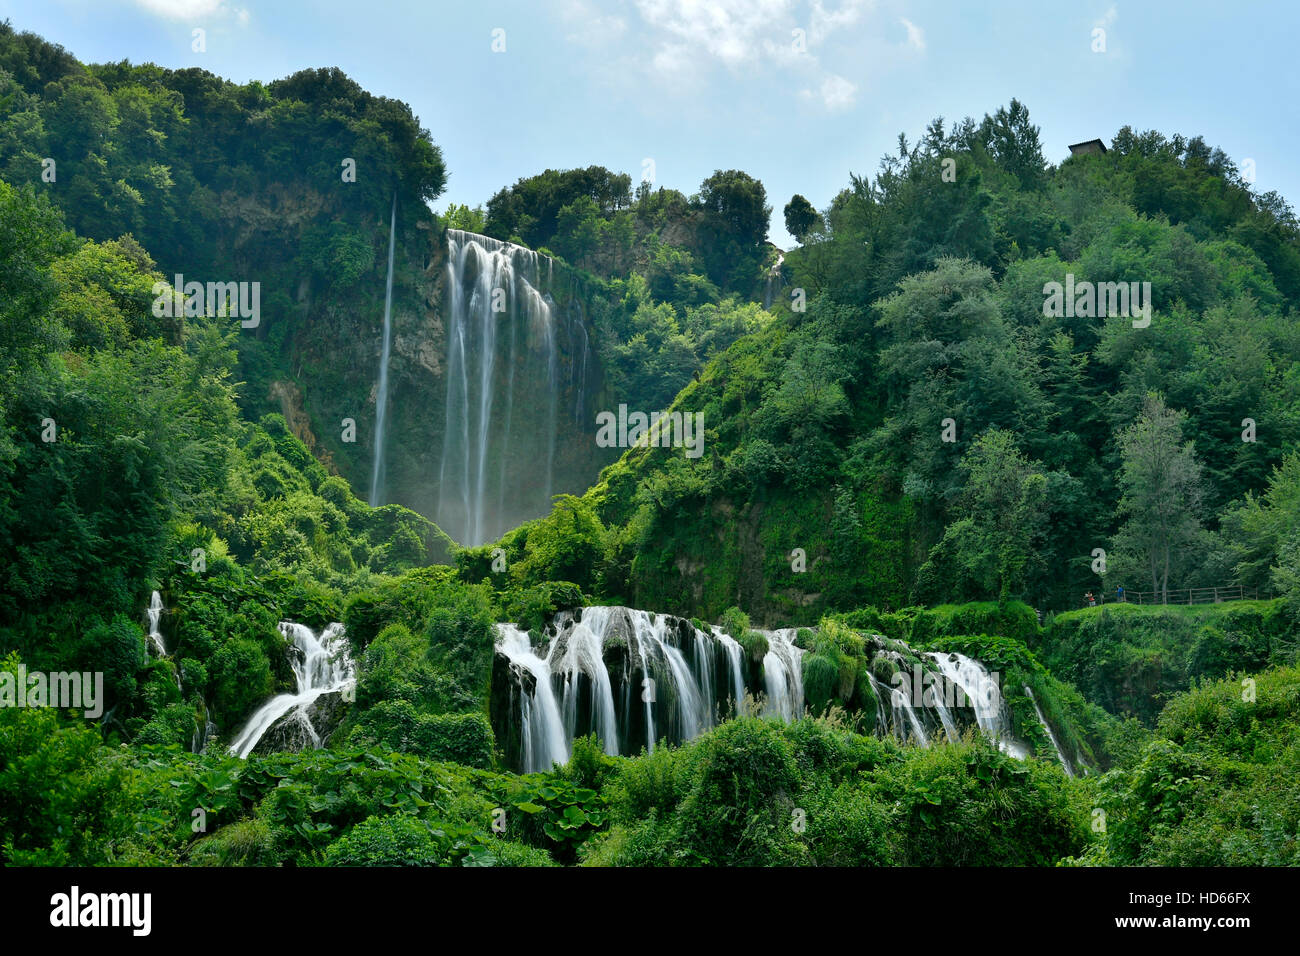 Man-made waterfall, Marmore Waterfalls, Cascate delle Marmore, Umbria, Italy Stock Photo